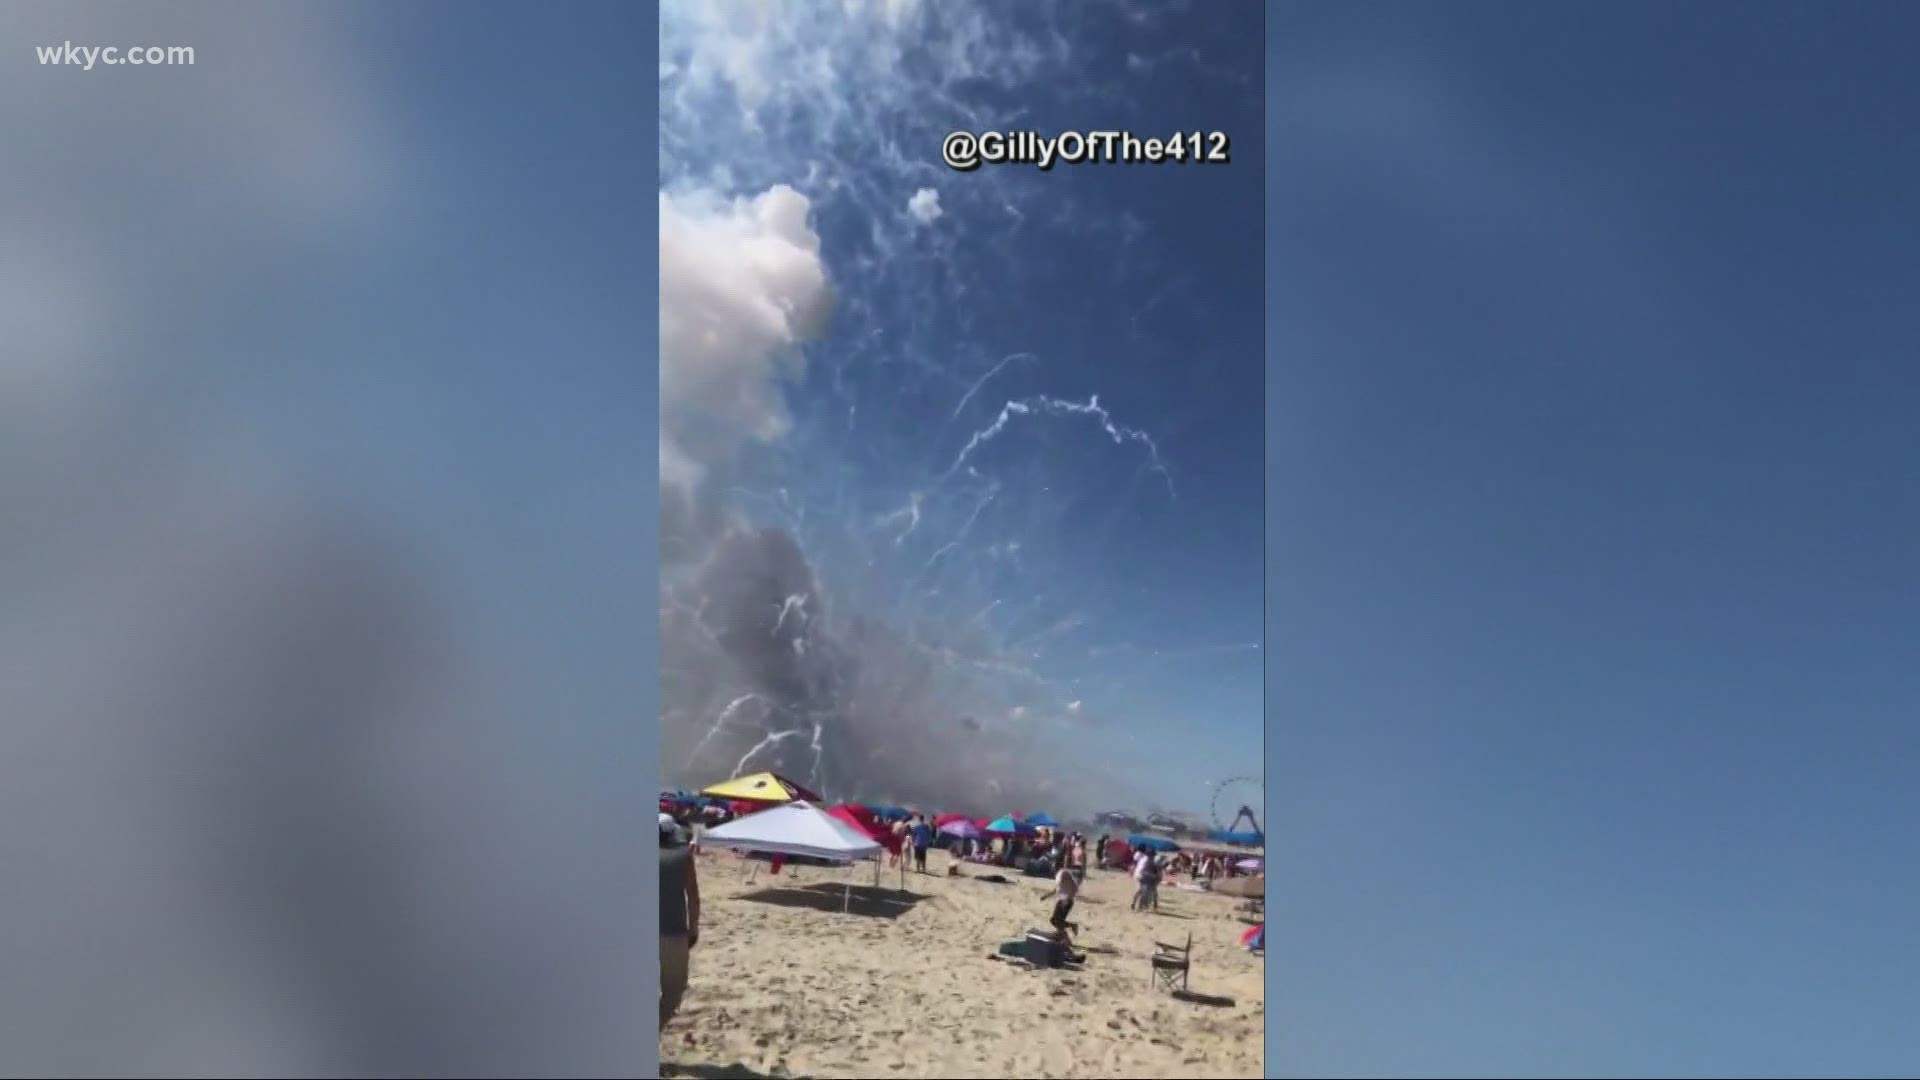 Ocean City responders initially thought there was a vehicle on fire in the area of Dorchester Street - but when they got there, found the fireworks exploding.